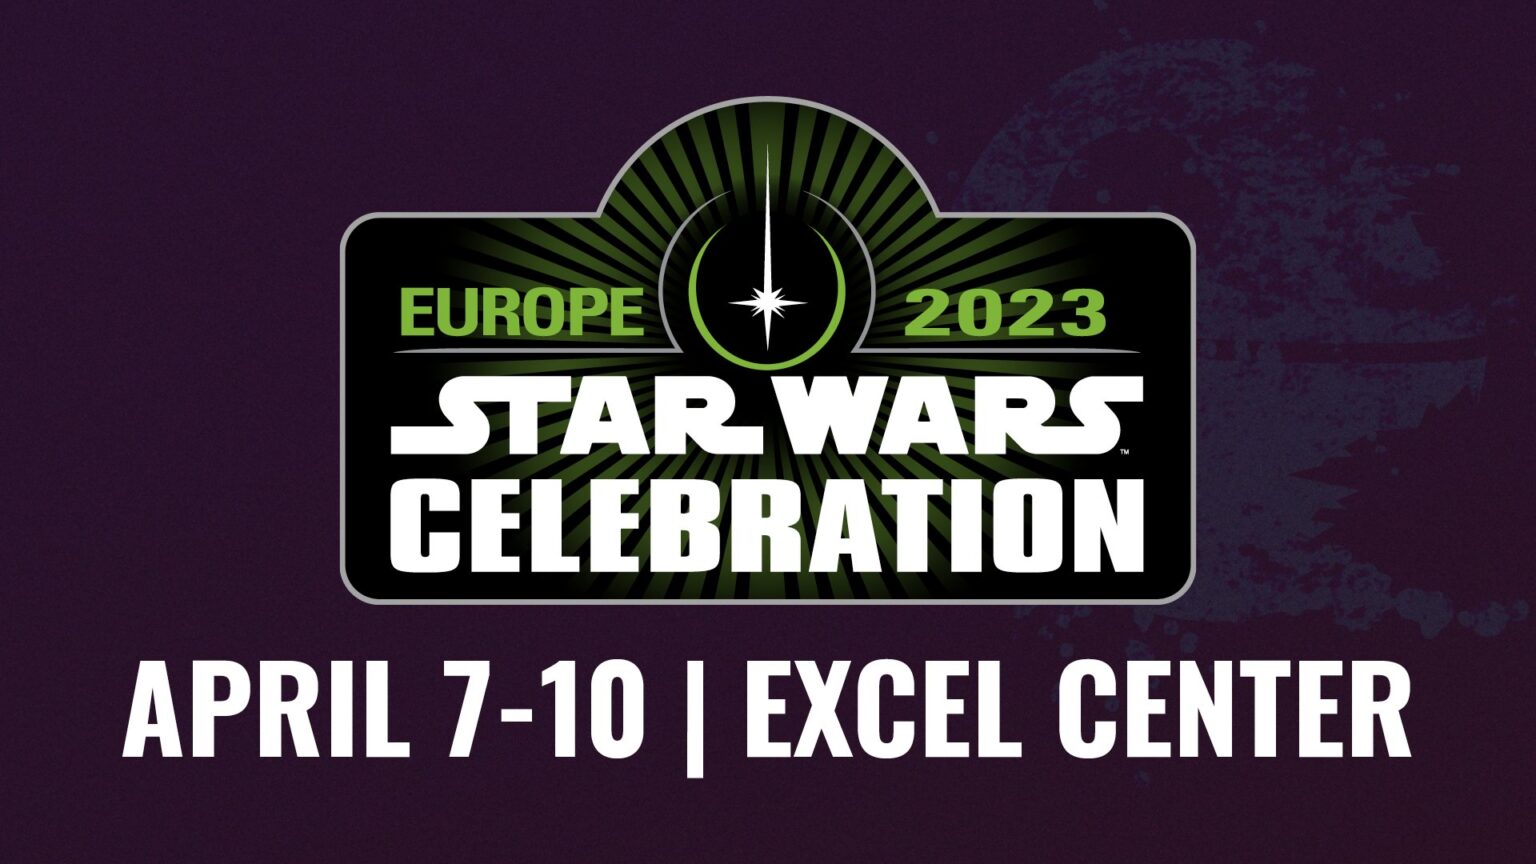 STAR WARS CELEBRATION April, London 2023 confirmed! Yes! Following